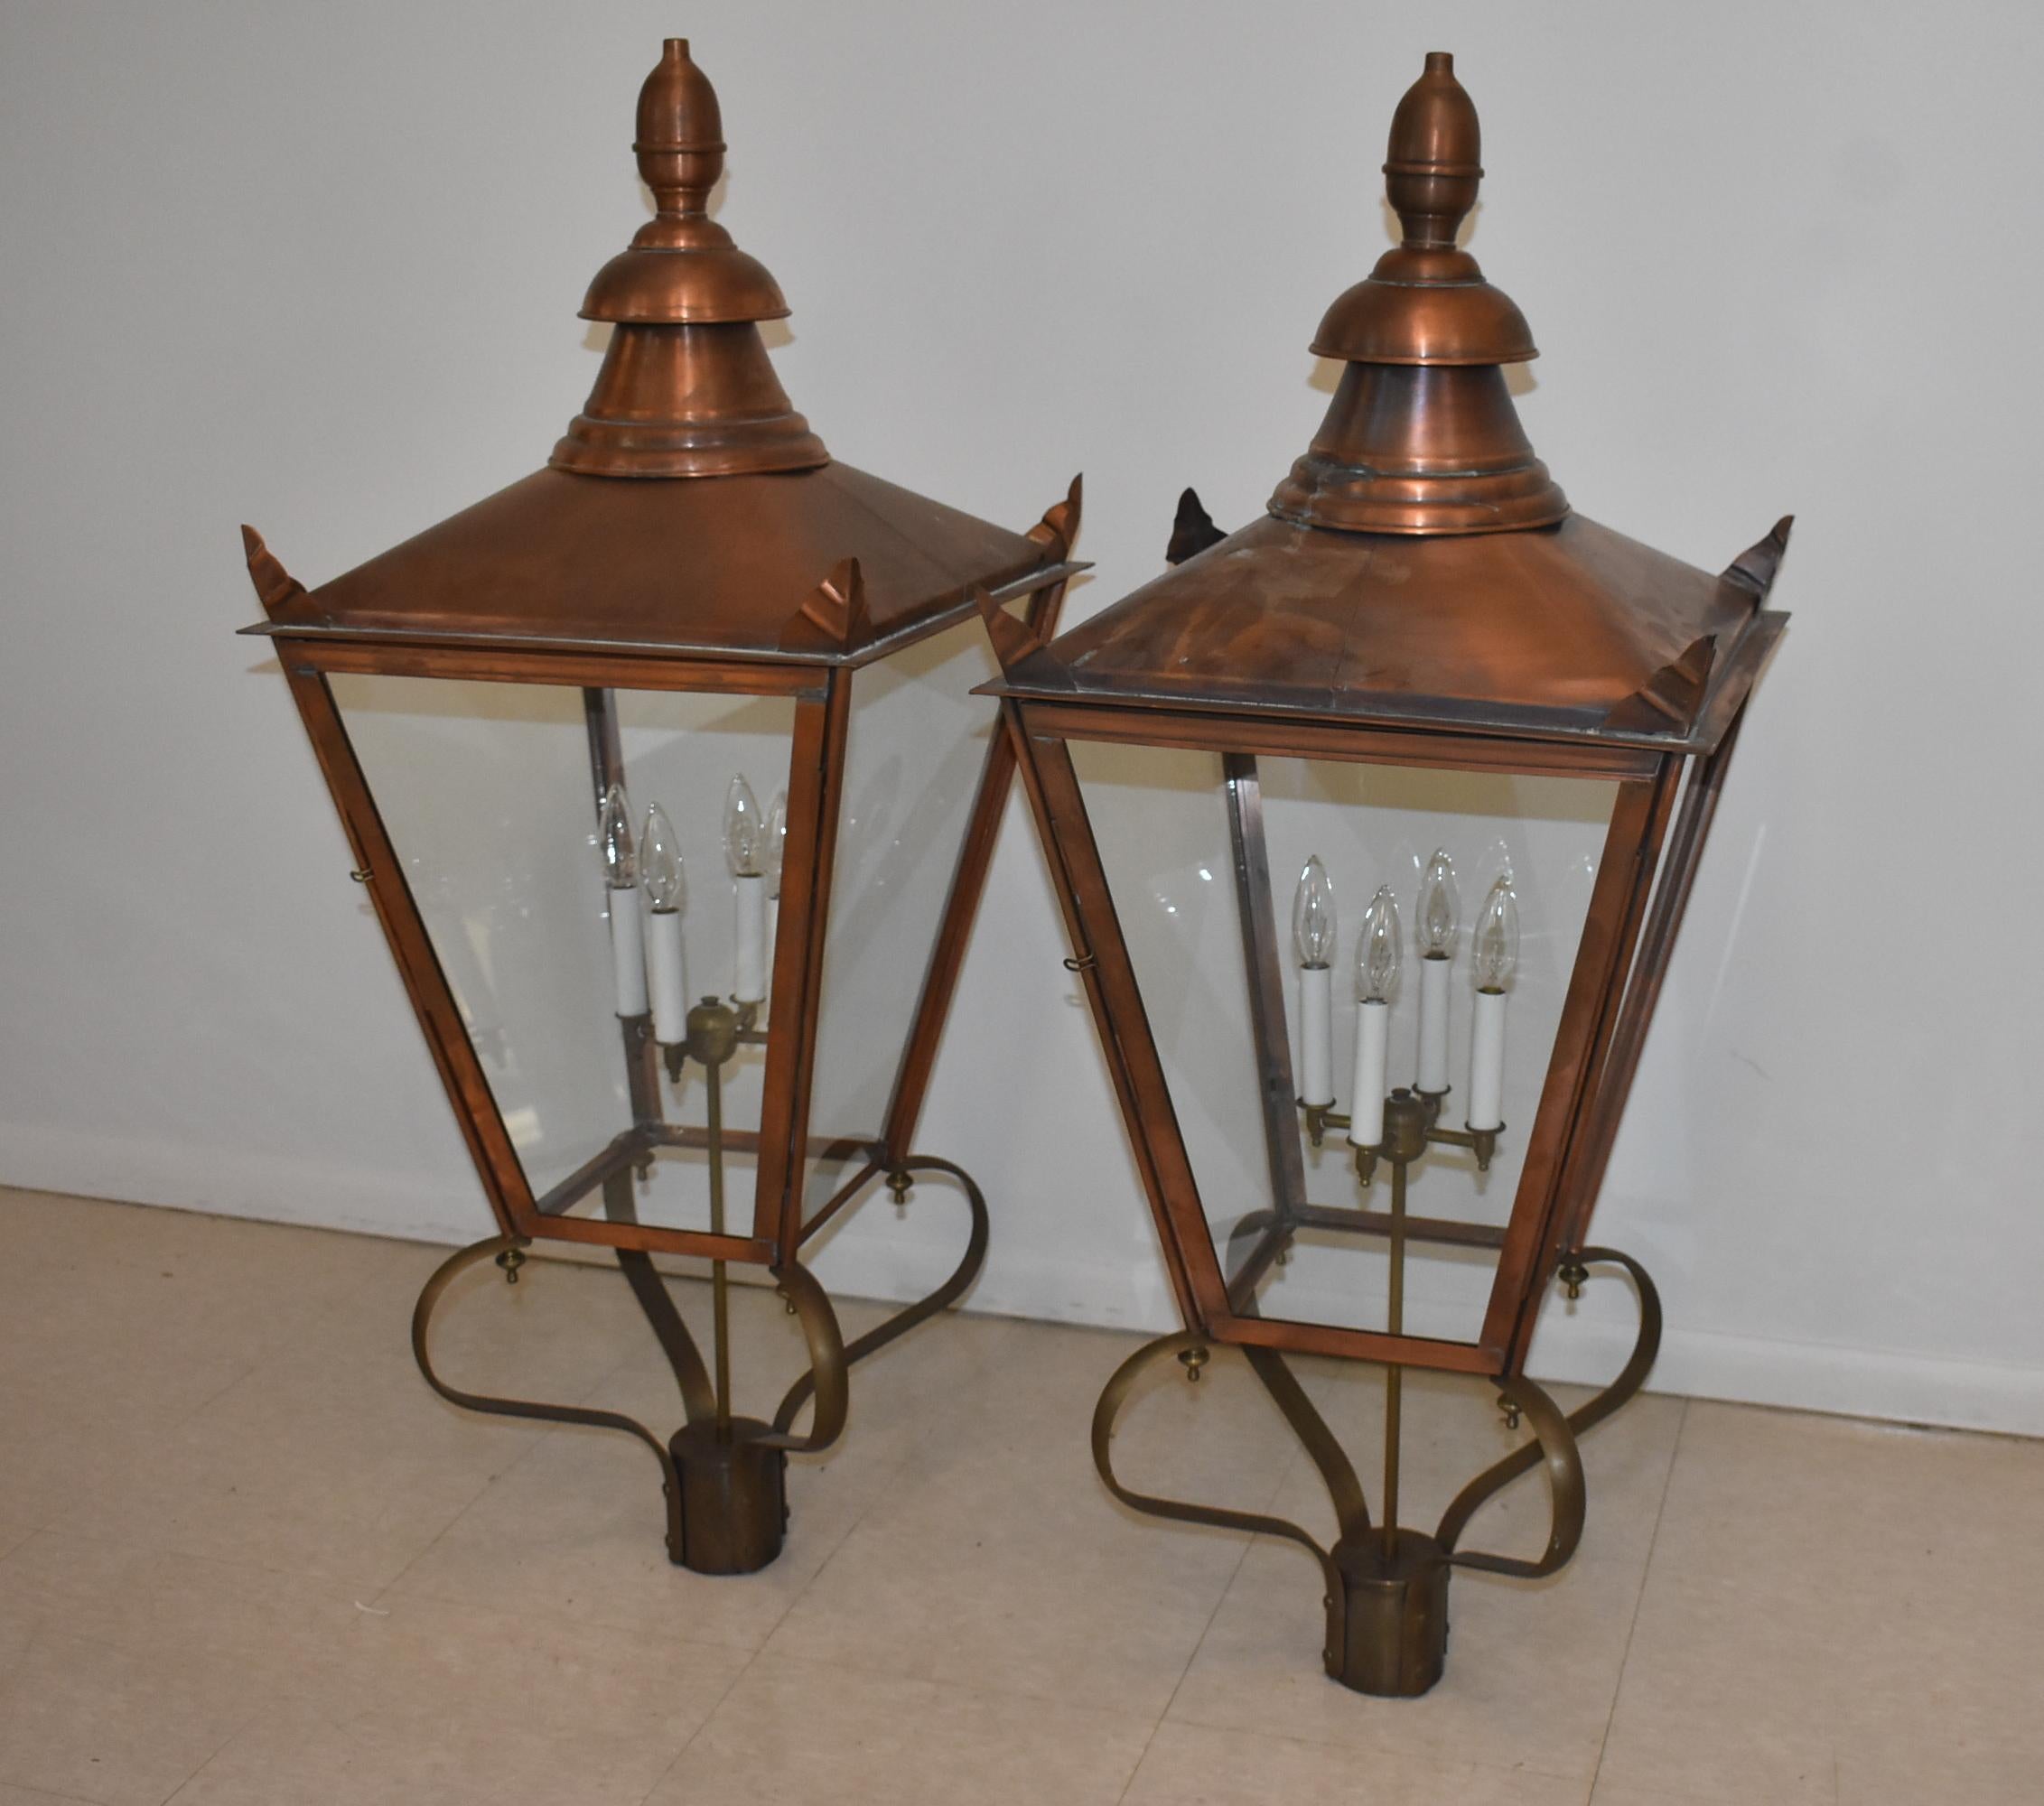 Pair of copper and brass oversize exterior Williamsburg lanterns. Four candelabra lights. Door panel opens for access. Measures: 2 7/8